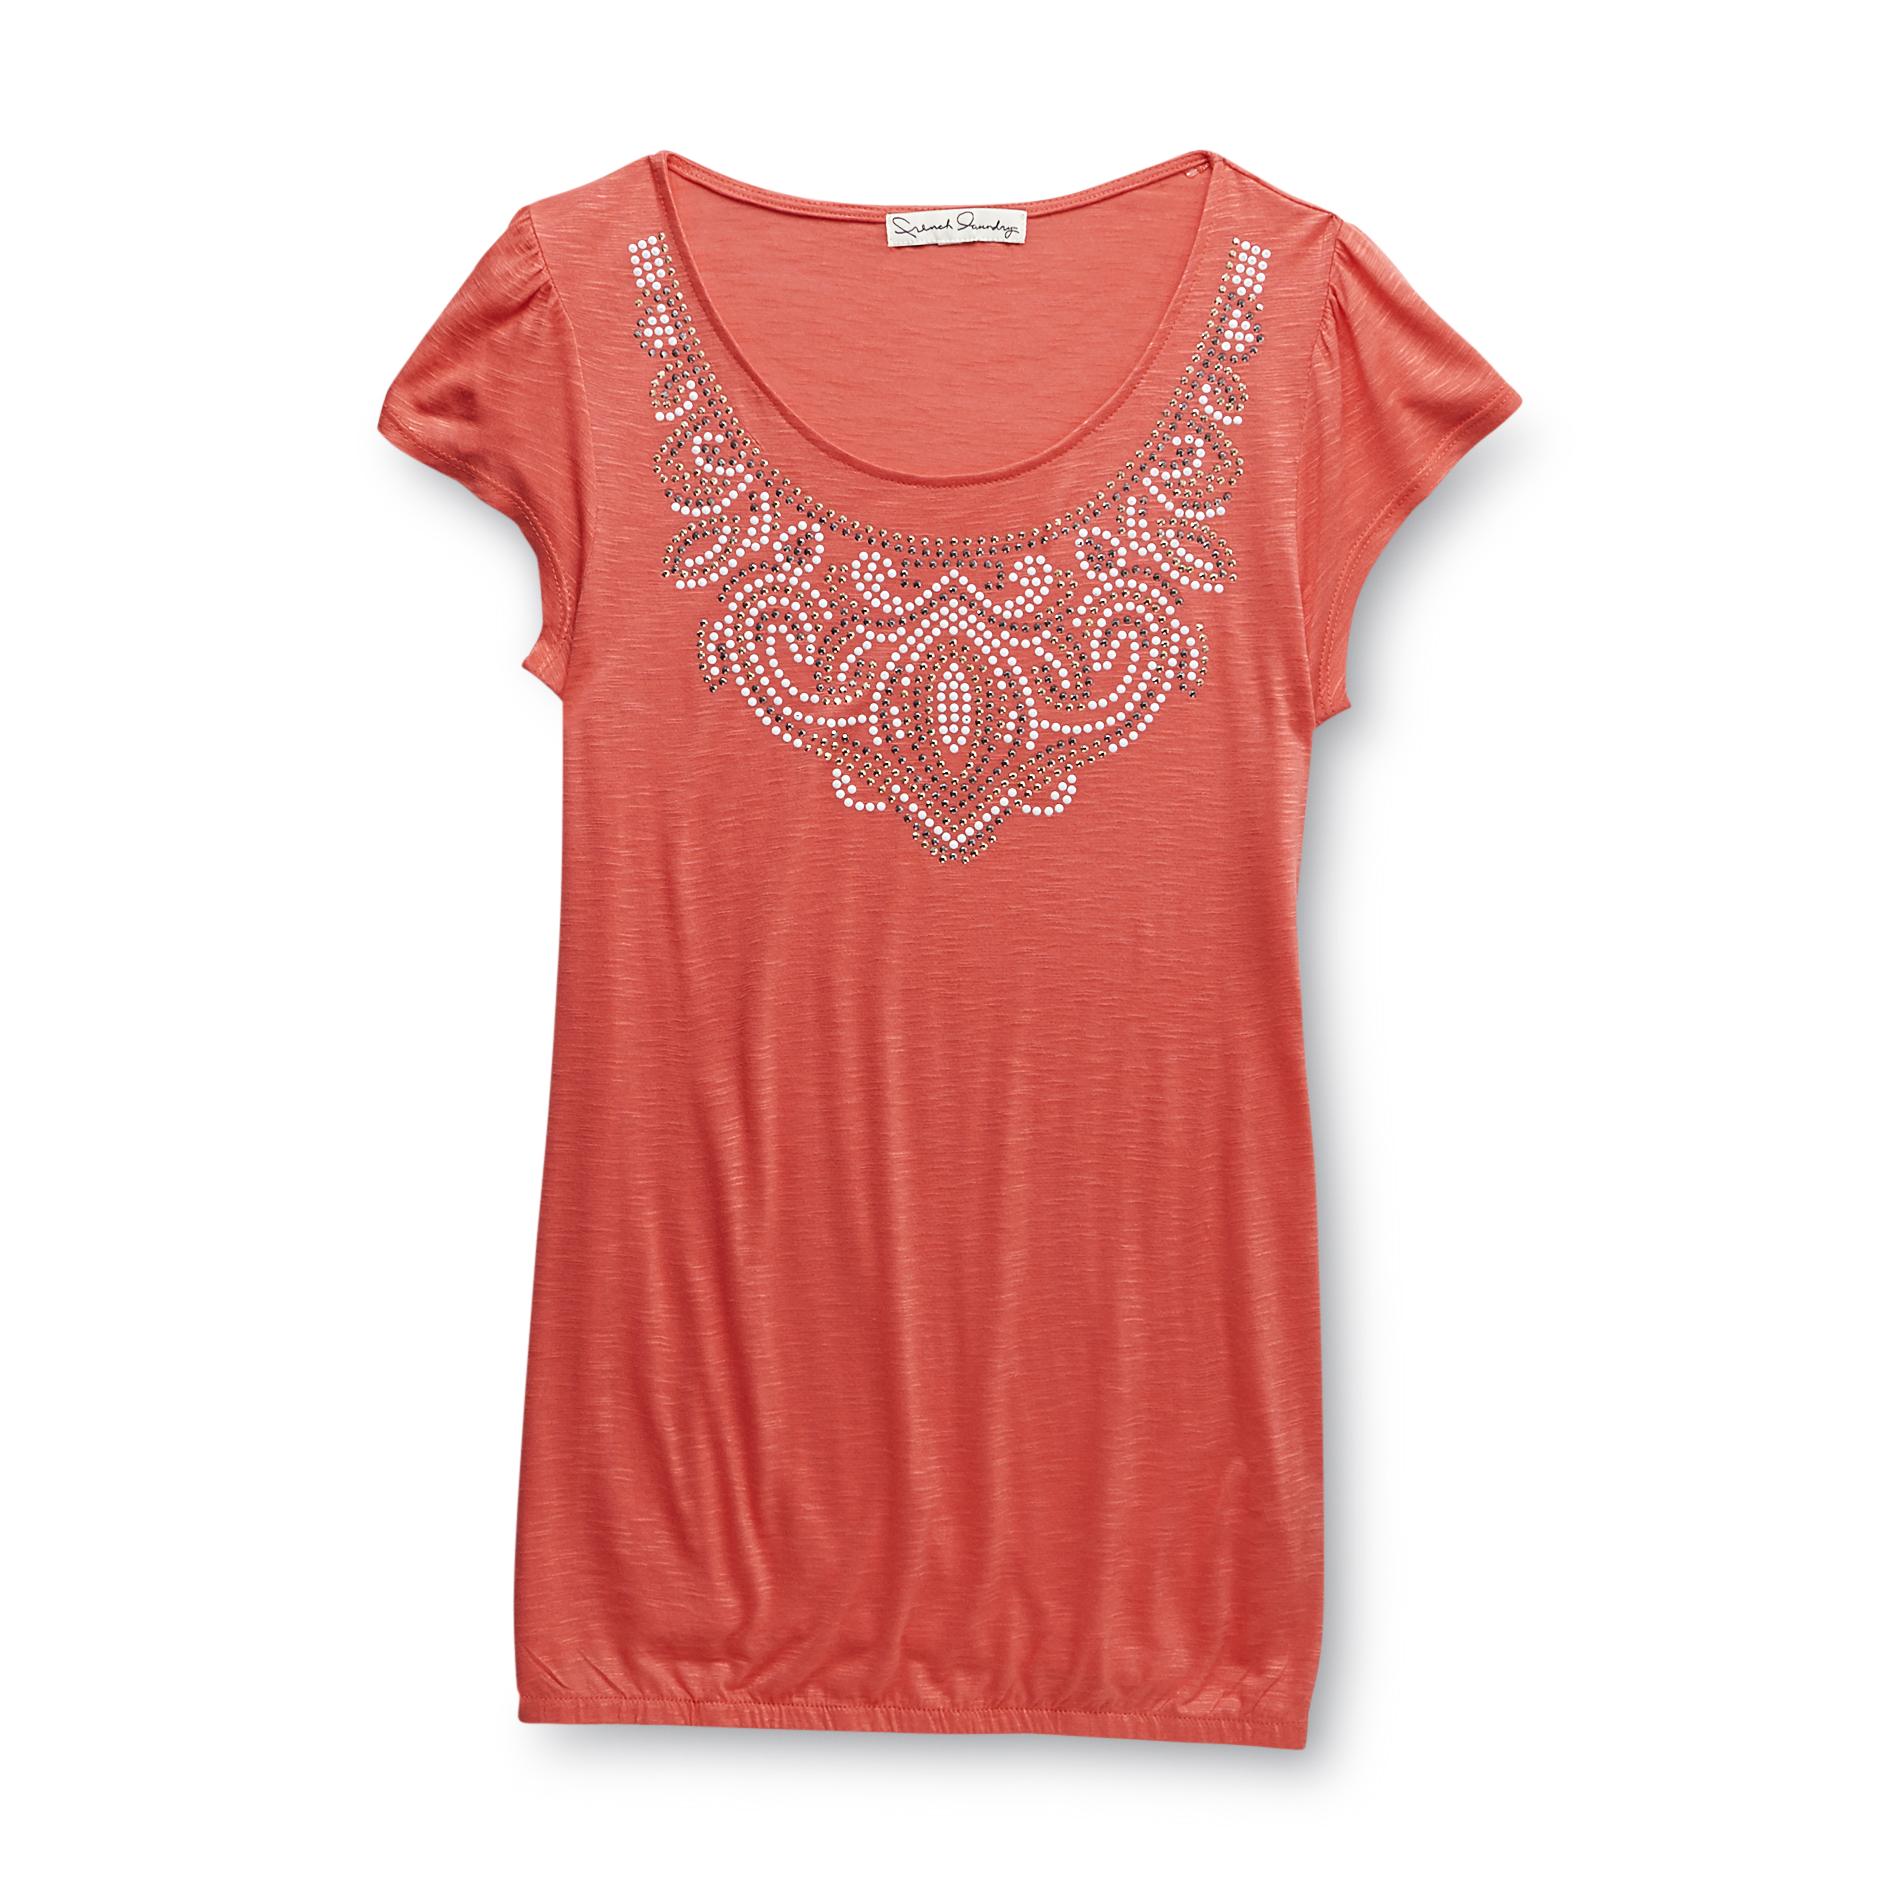 Canyon River Blues Women's Embellished Top